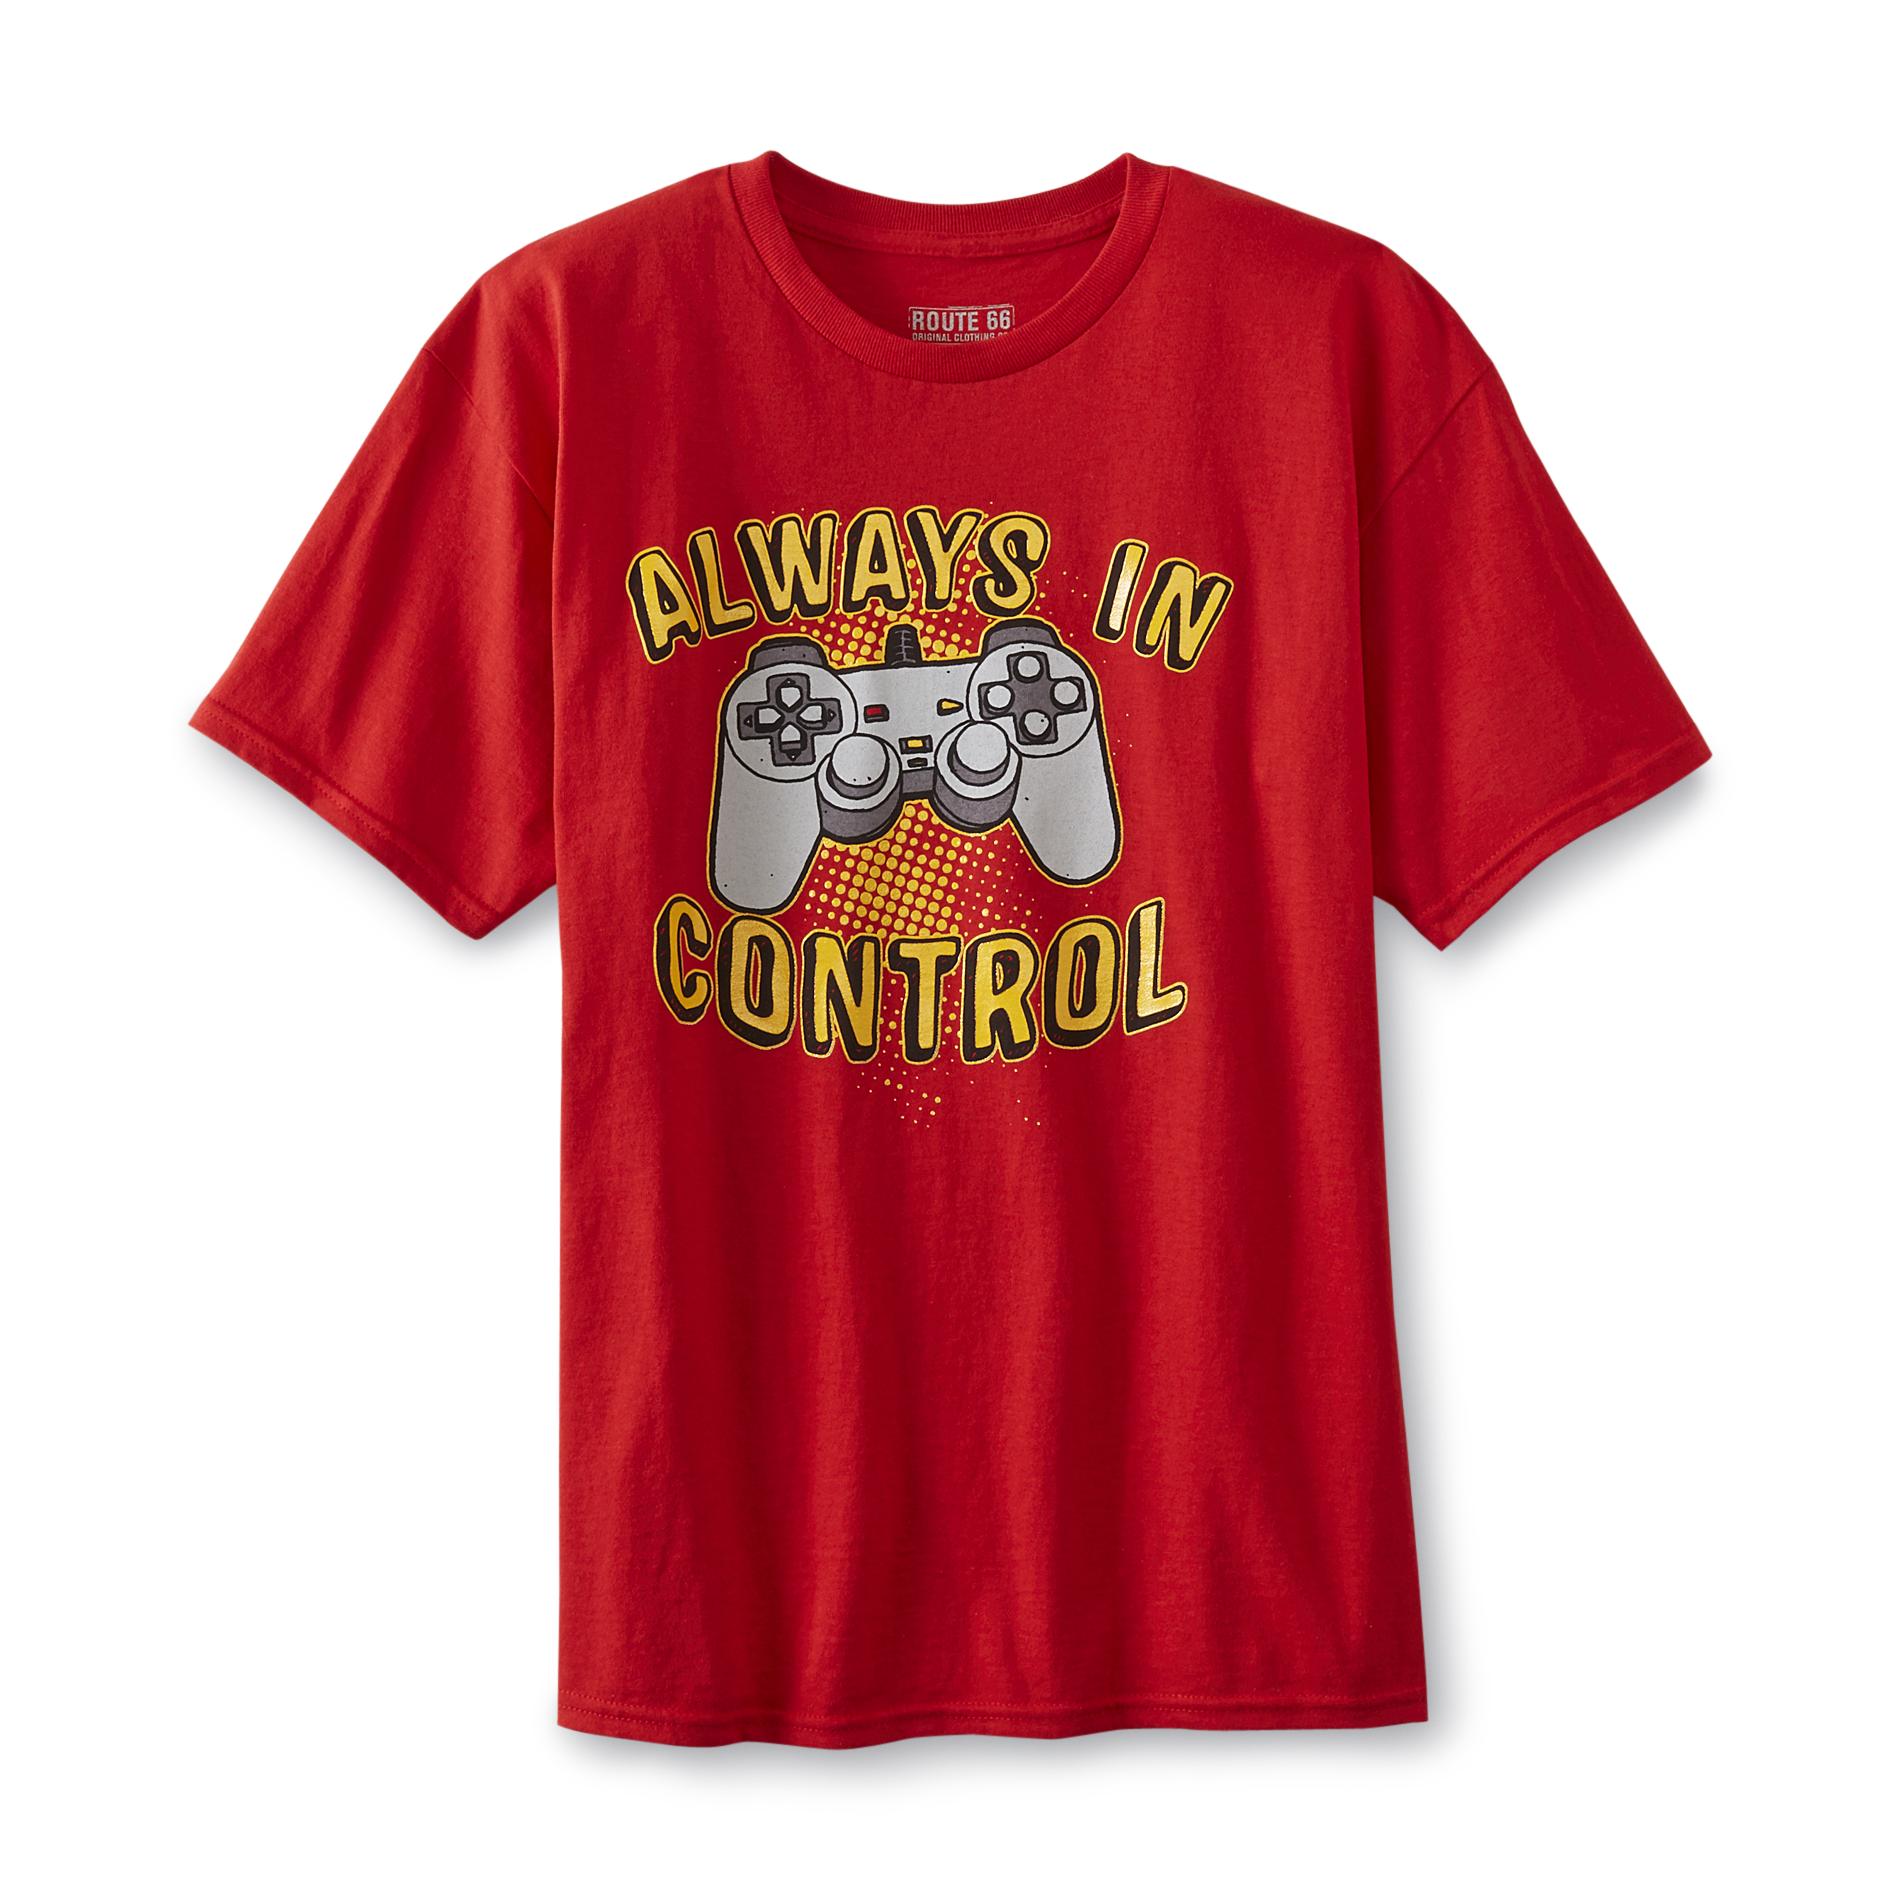 Route 66 Boy's Graphic T-Shirt - Video Game Controller